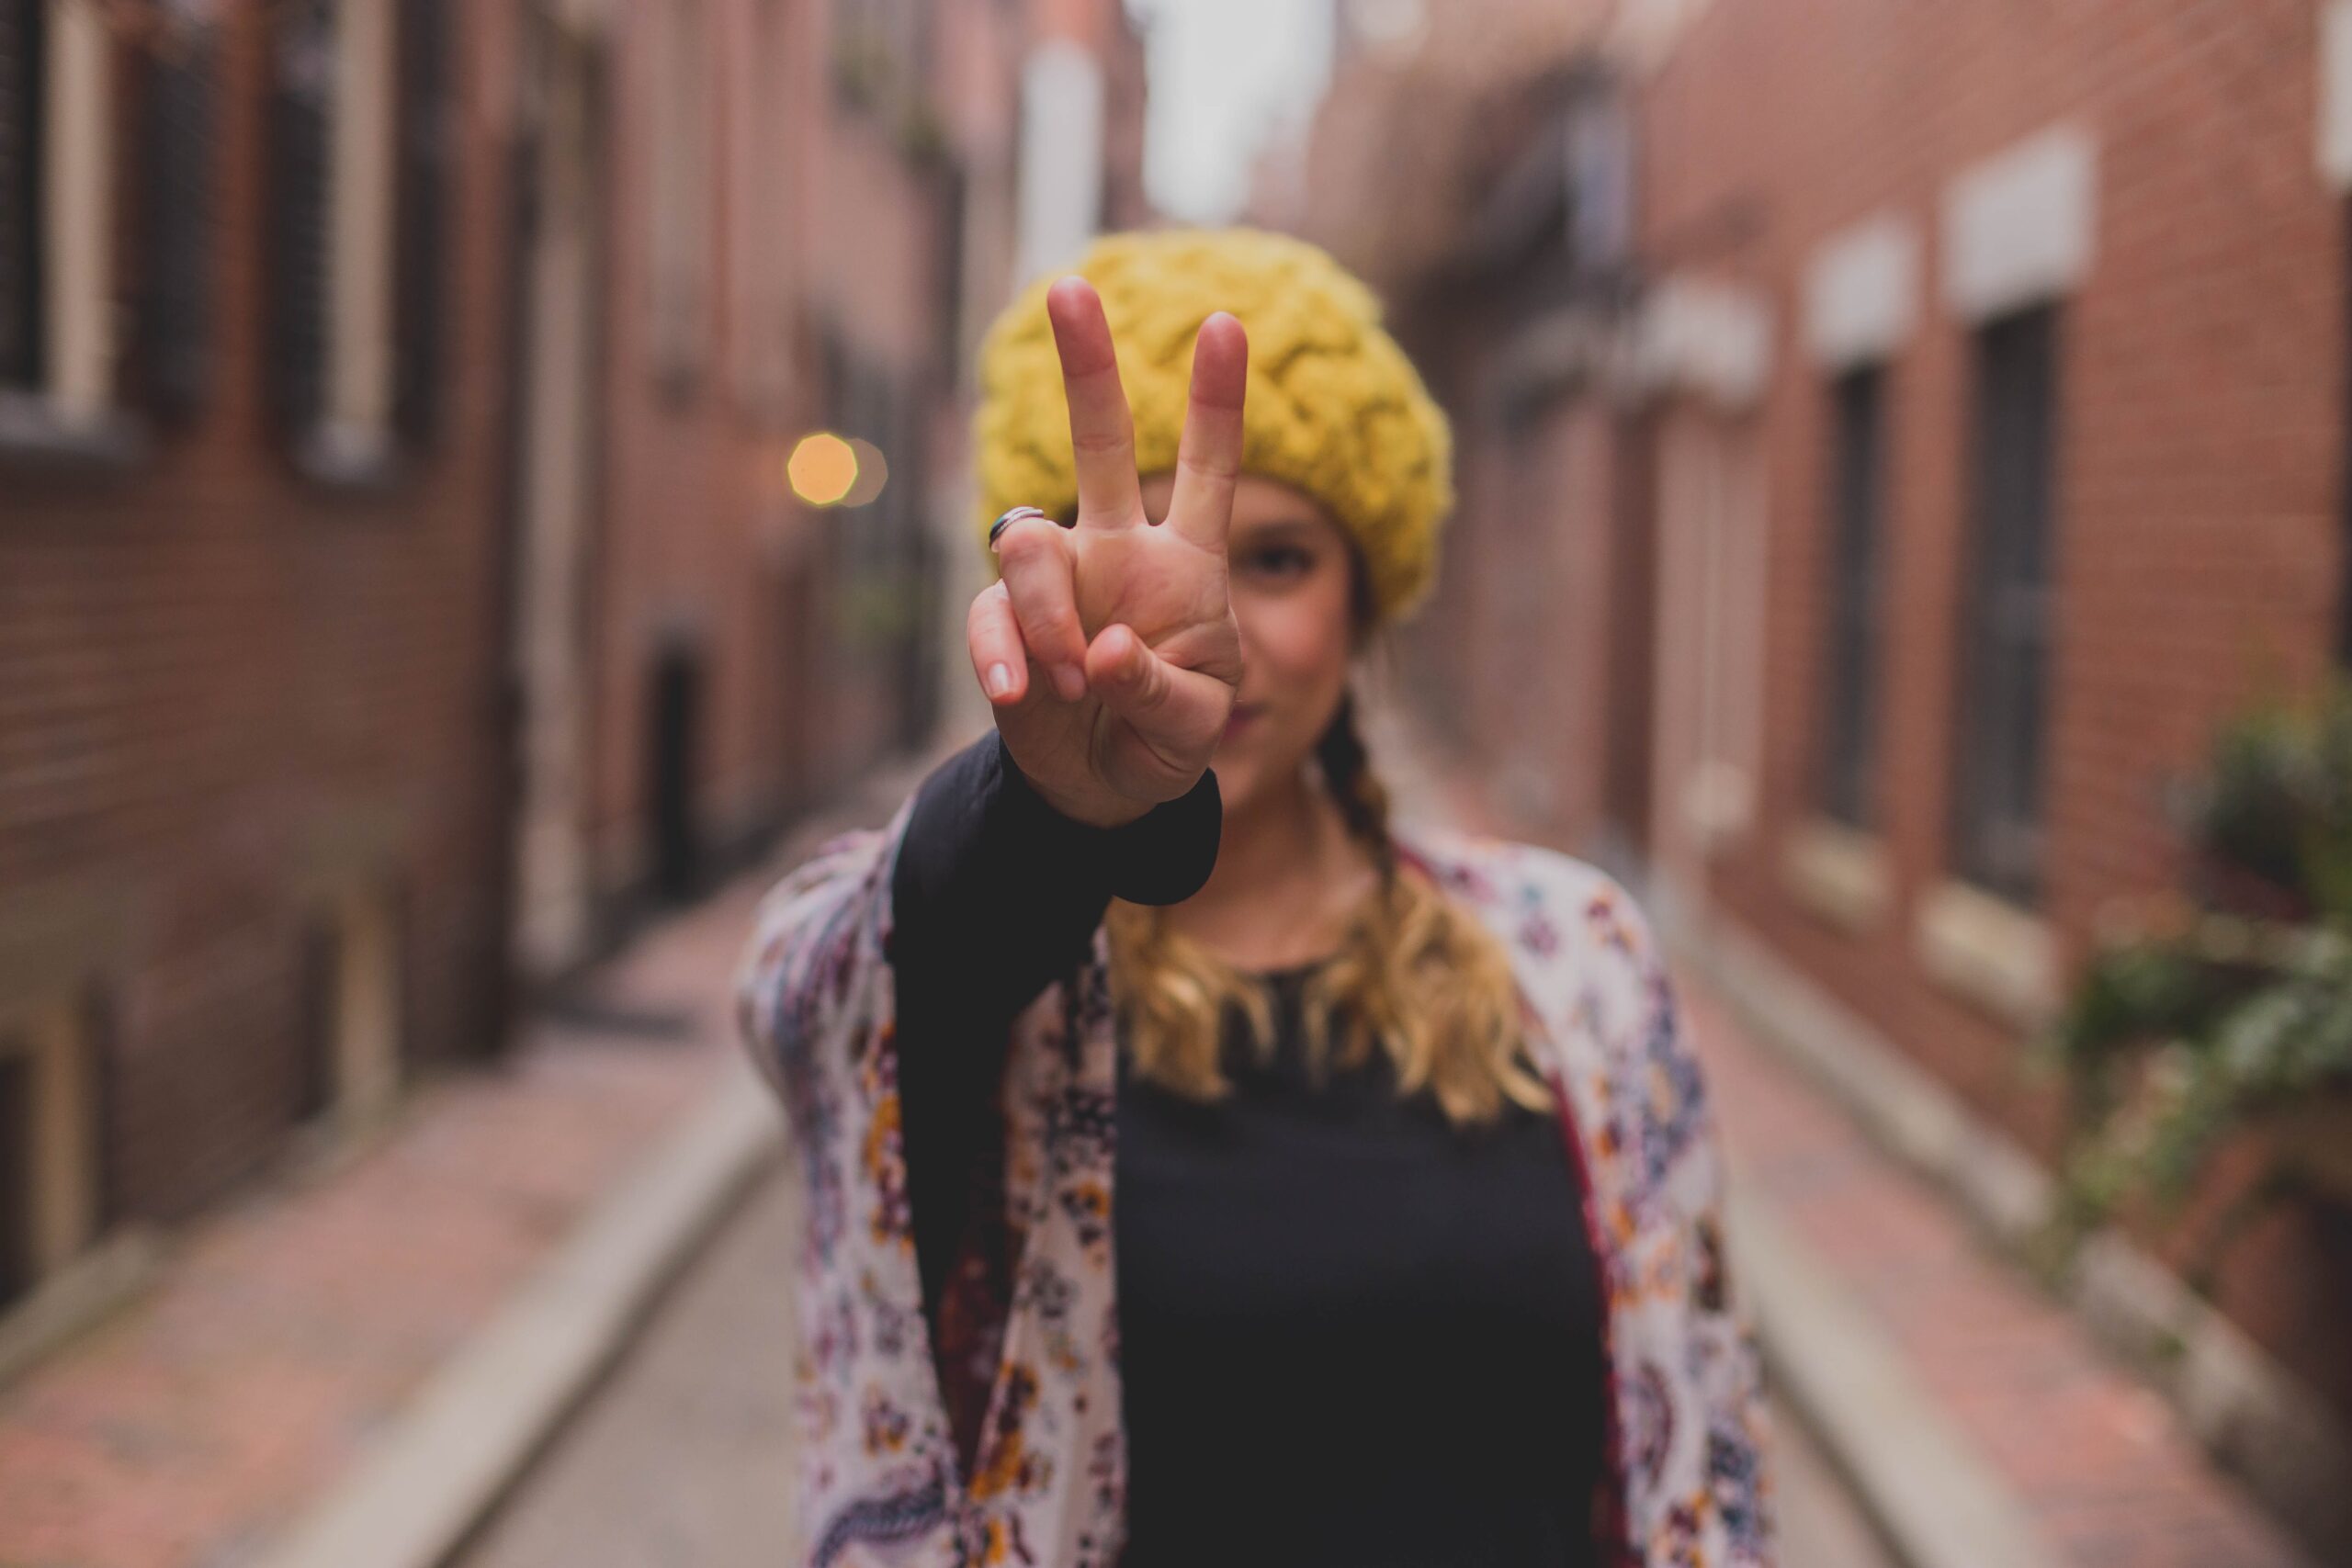 Woman holding up a peace sign